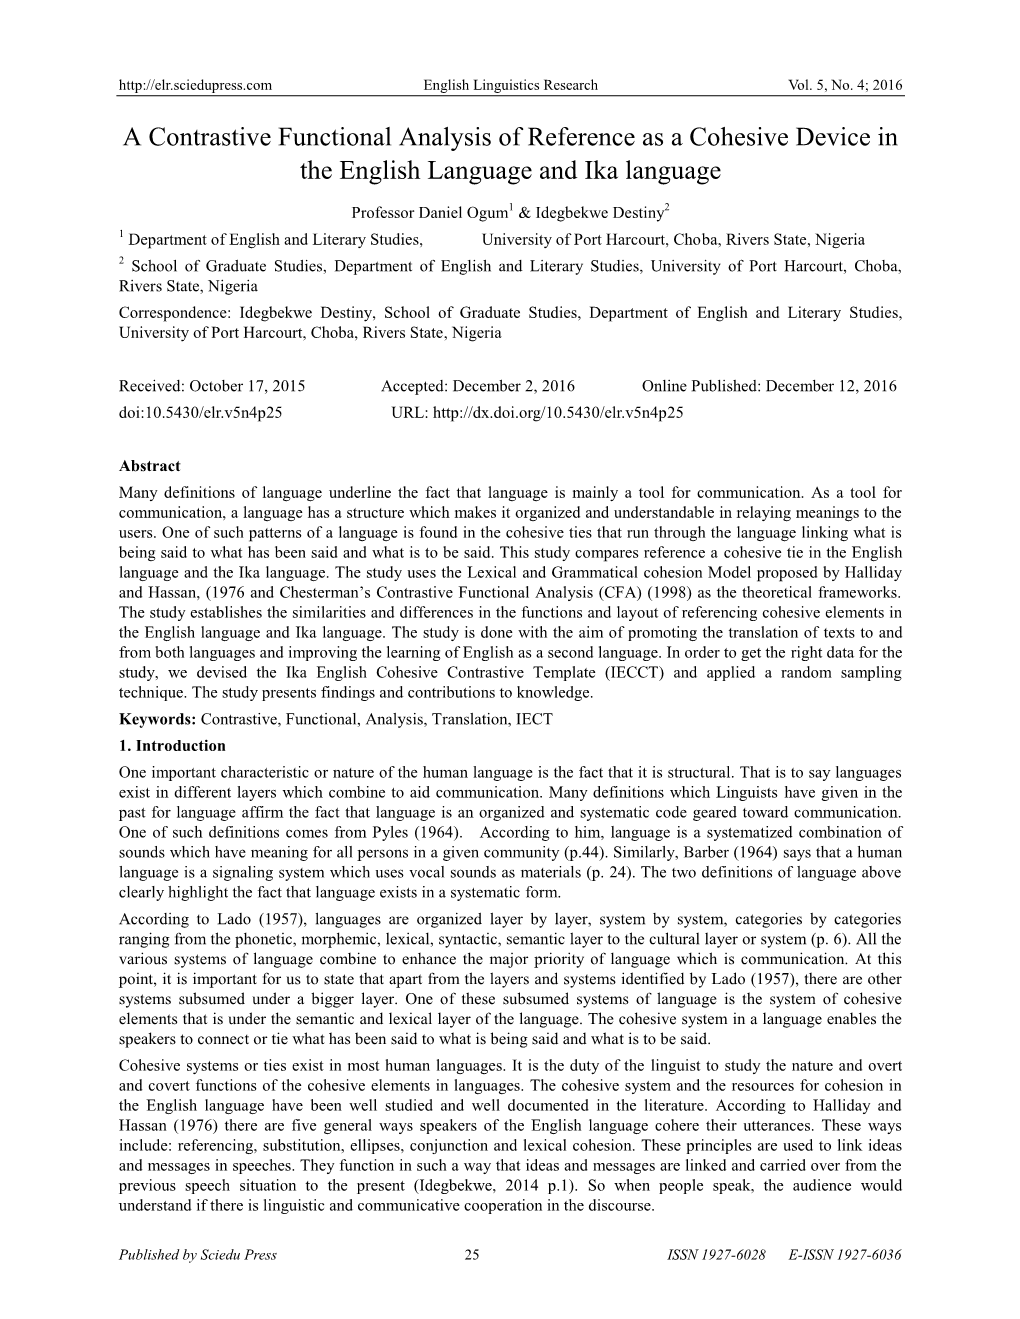 A Contrastive Functional Analysis of Reference As a Cohesive Device in the English Language and Ika Language